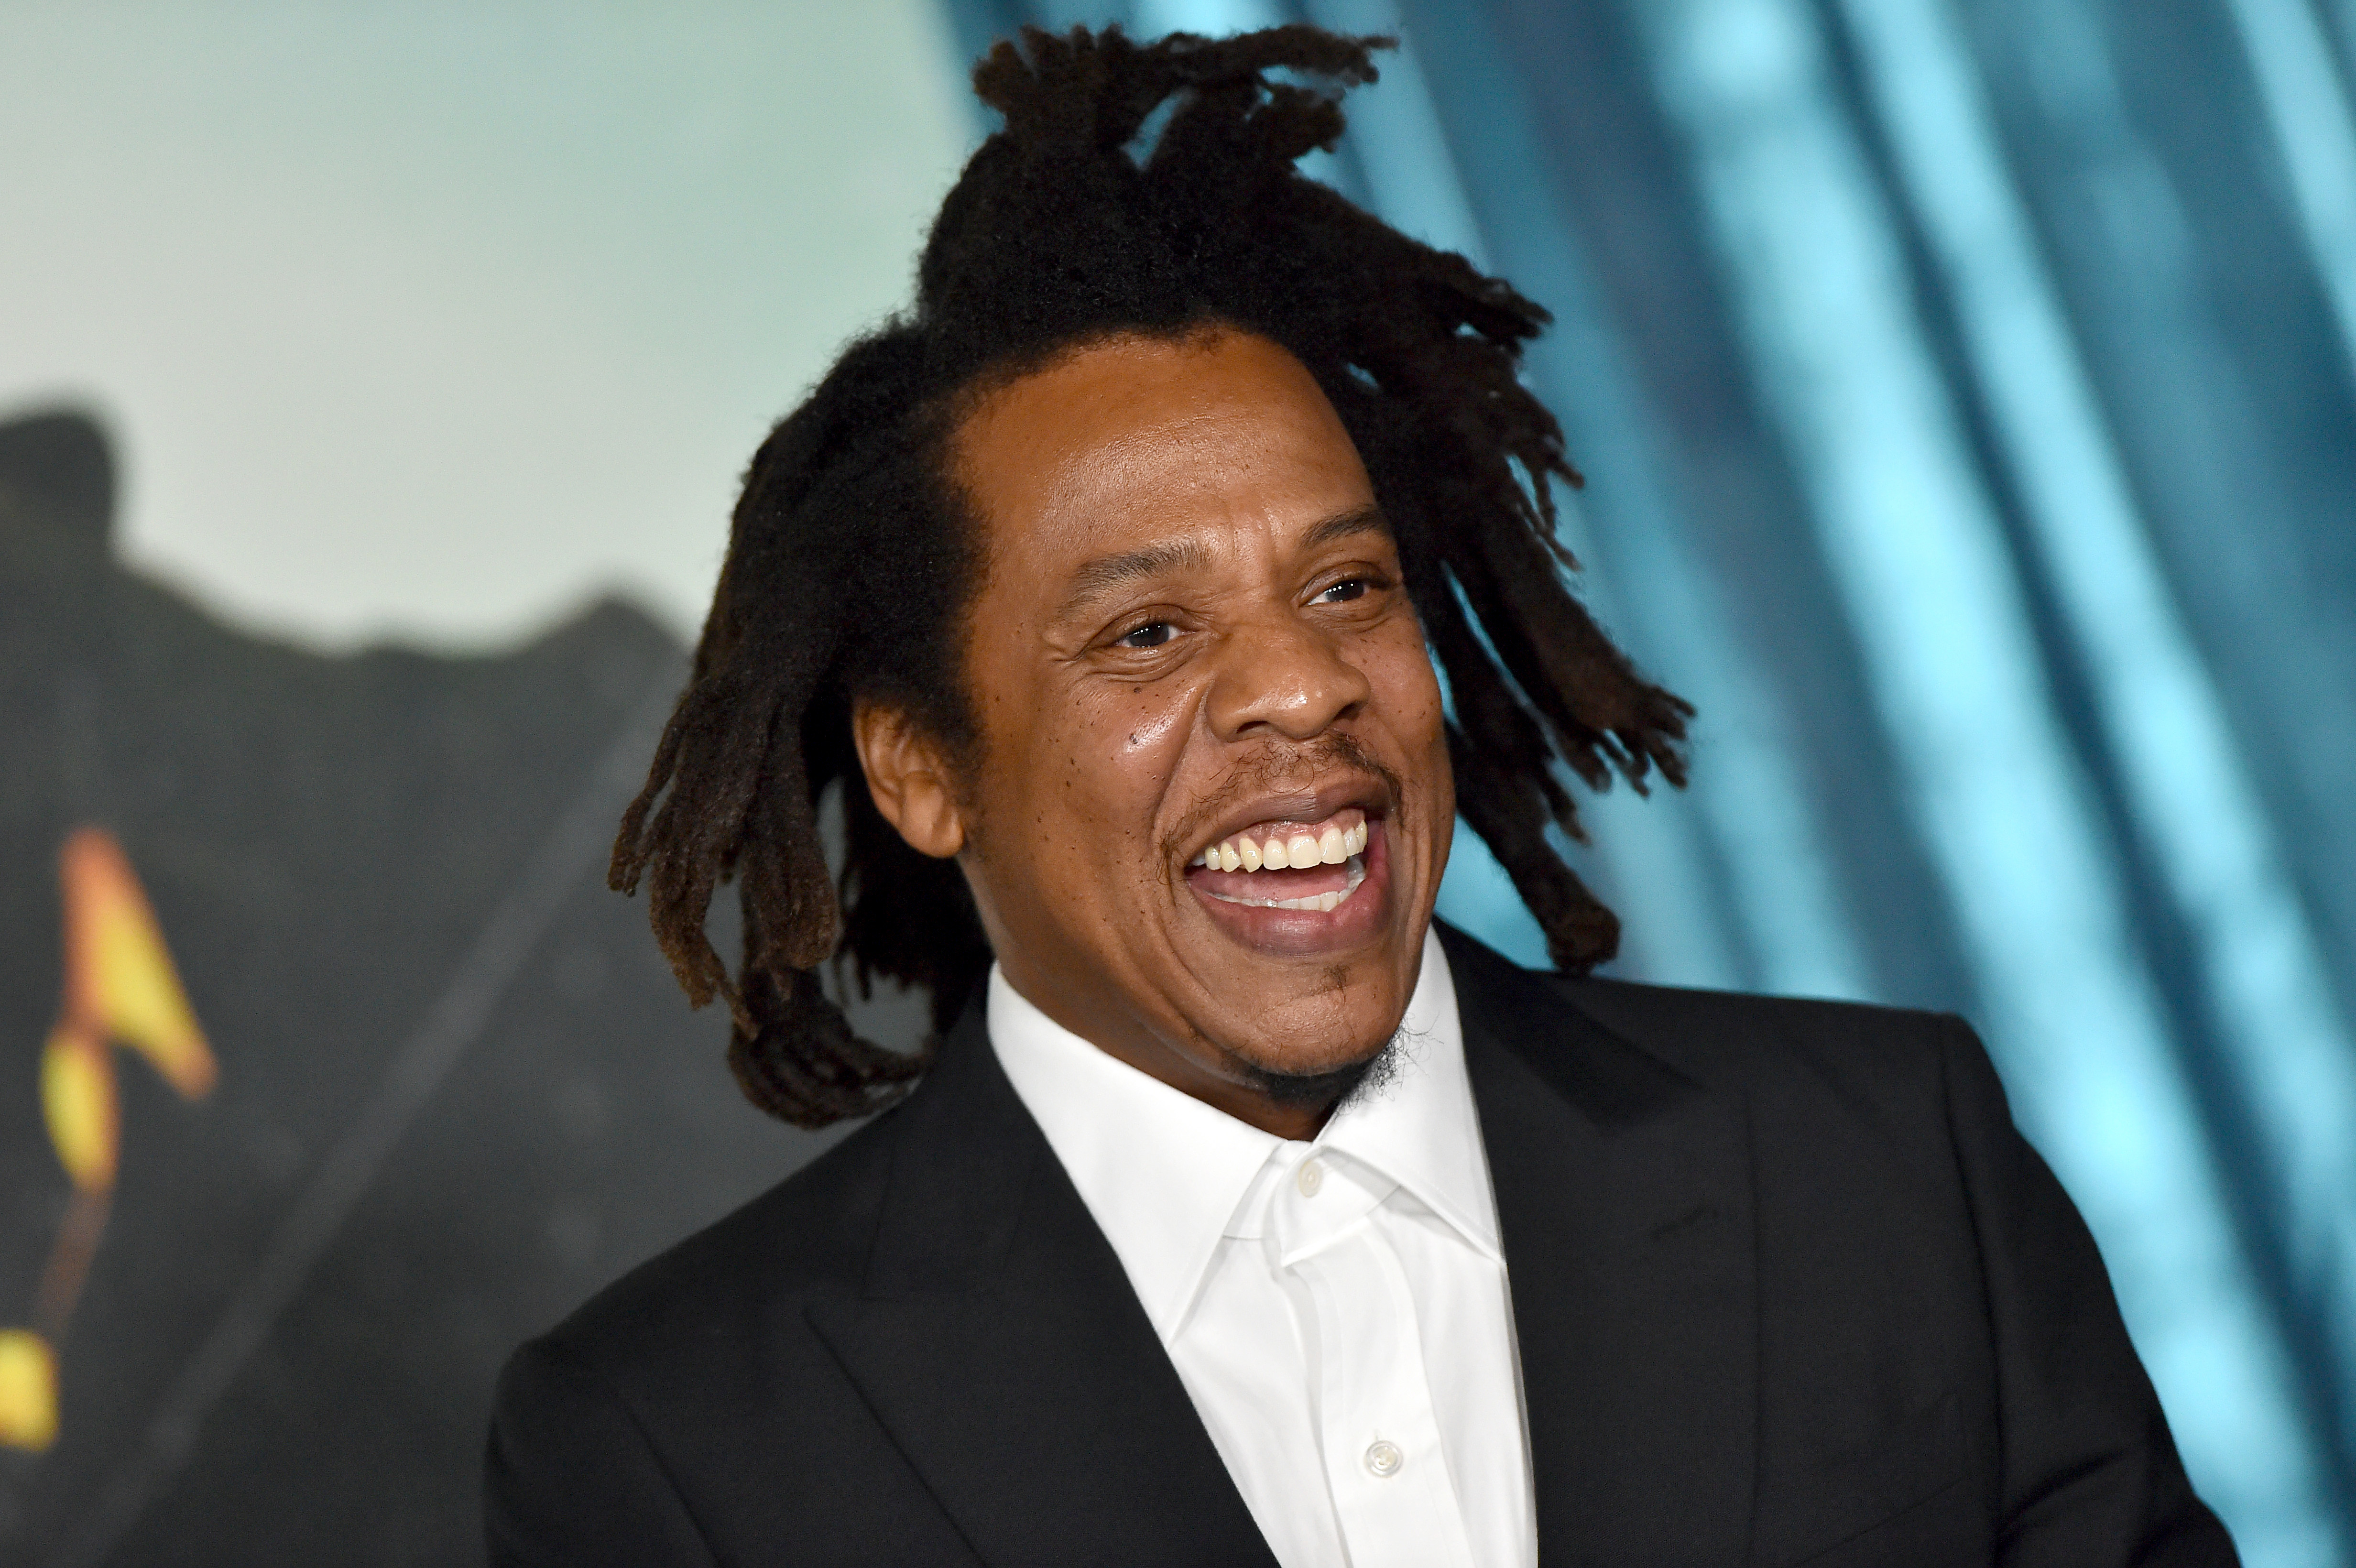 LVMH signs champagne deal with rap star Jay-Z